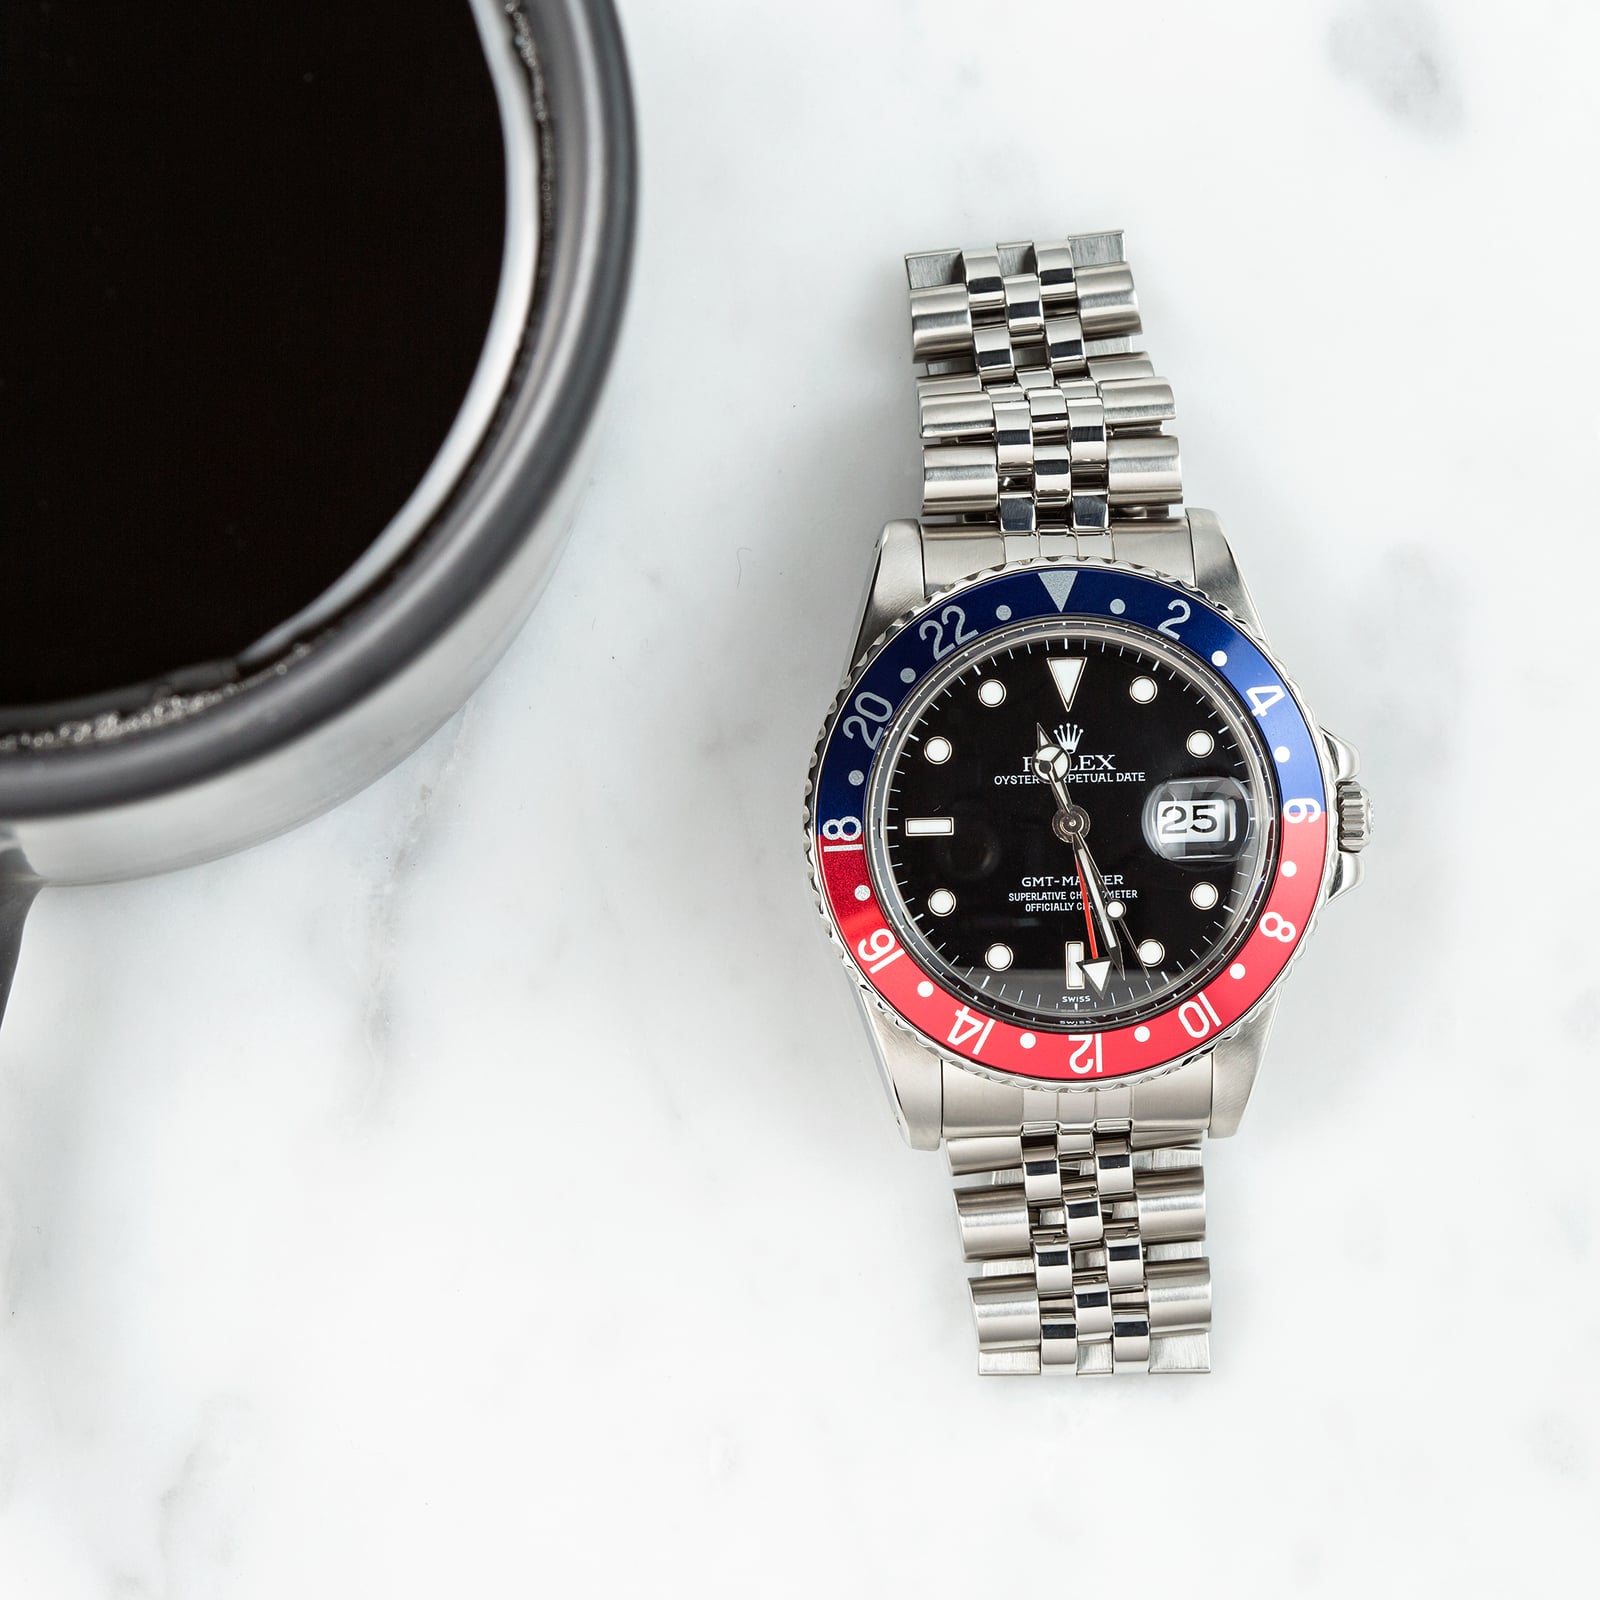 The GMT-Master ref. 16750 Is A 